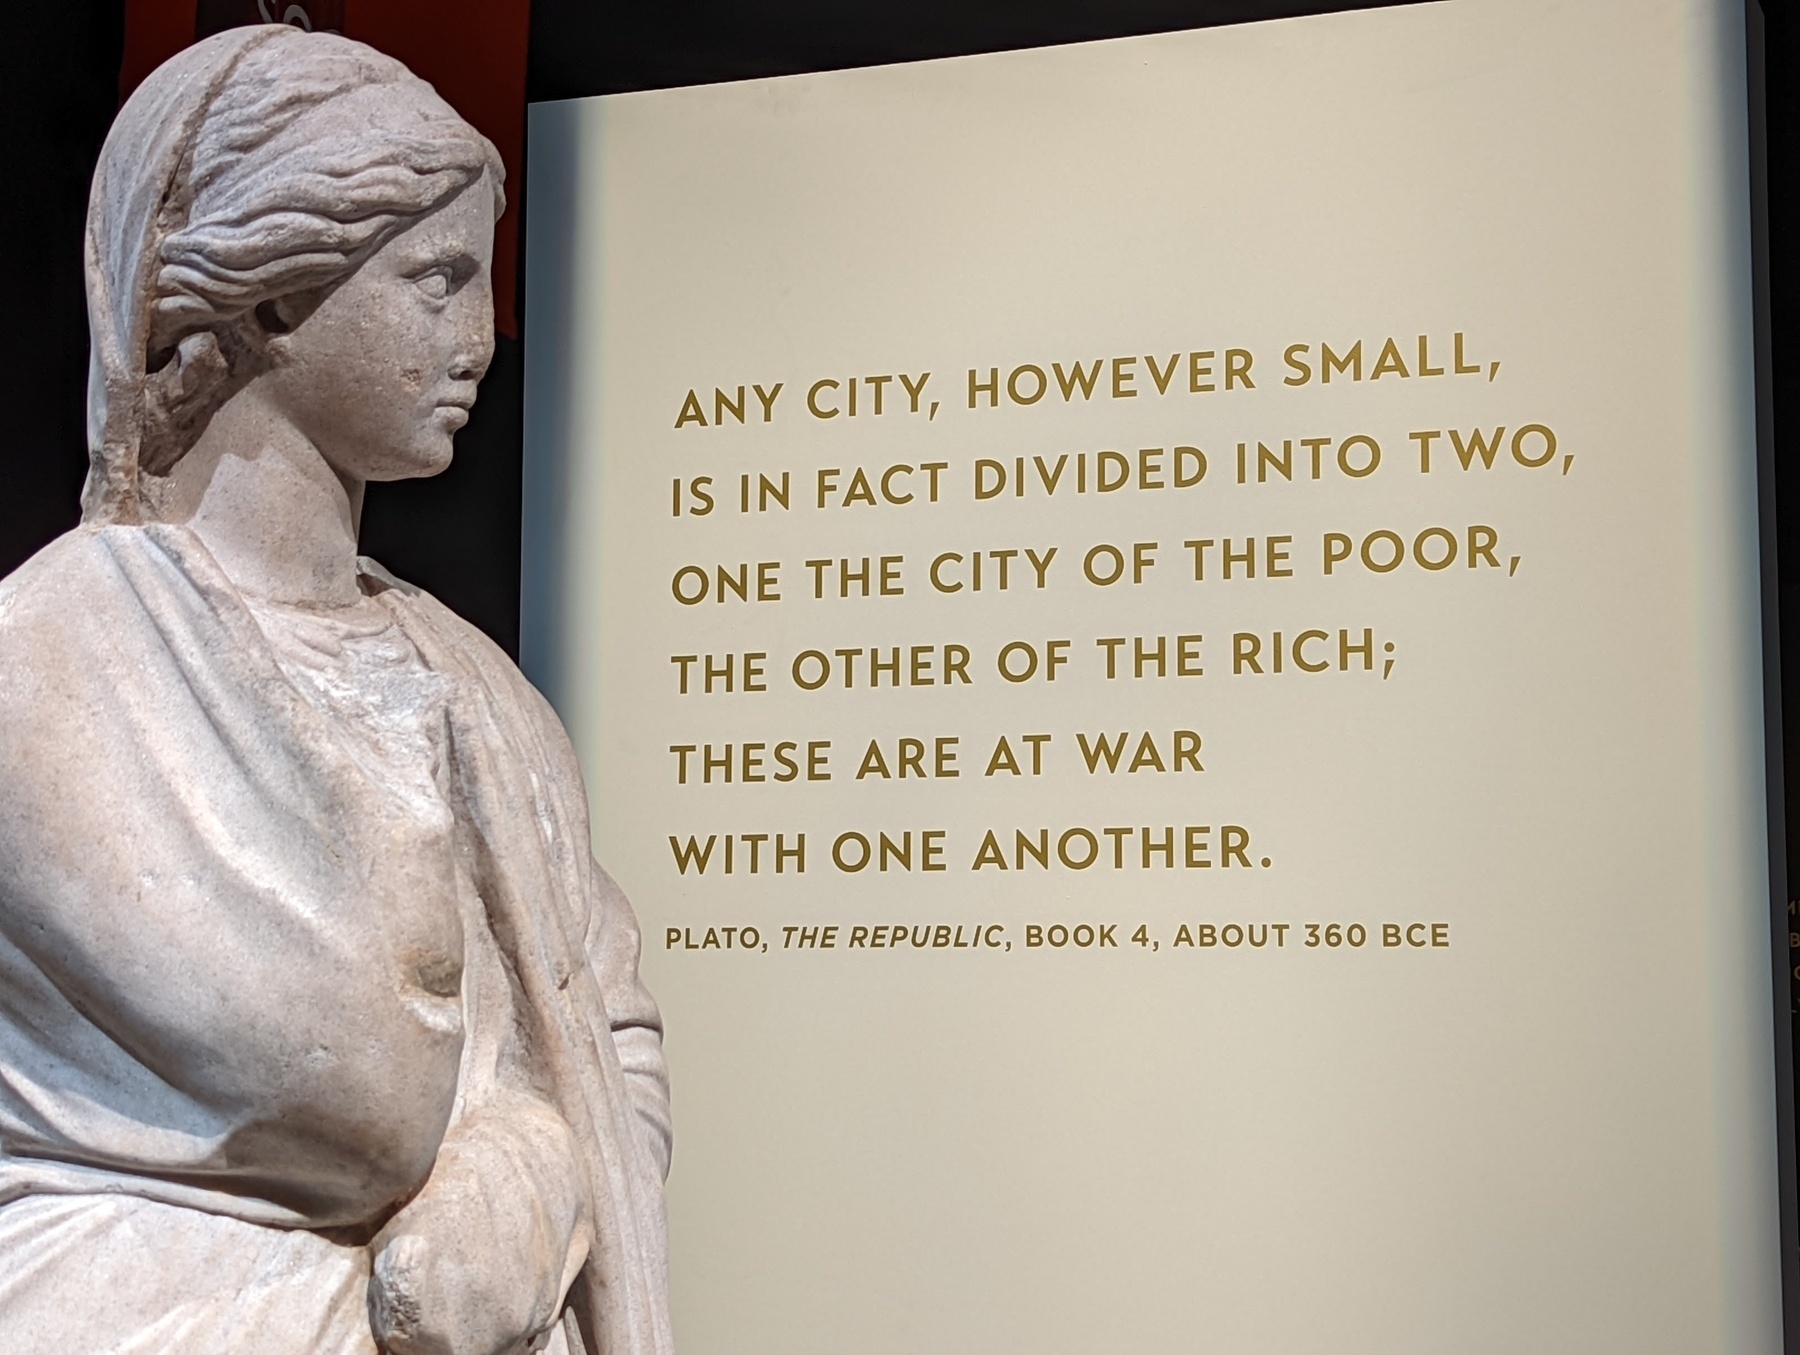 An ancient Greek marble statue of a woman regards a museum sign with a quote from Plato's Republic, which reads: Any city, however small, is in fact divided into two, one the city of the poor, the other of the rich; these are at war with one another.